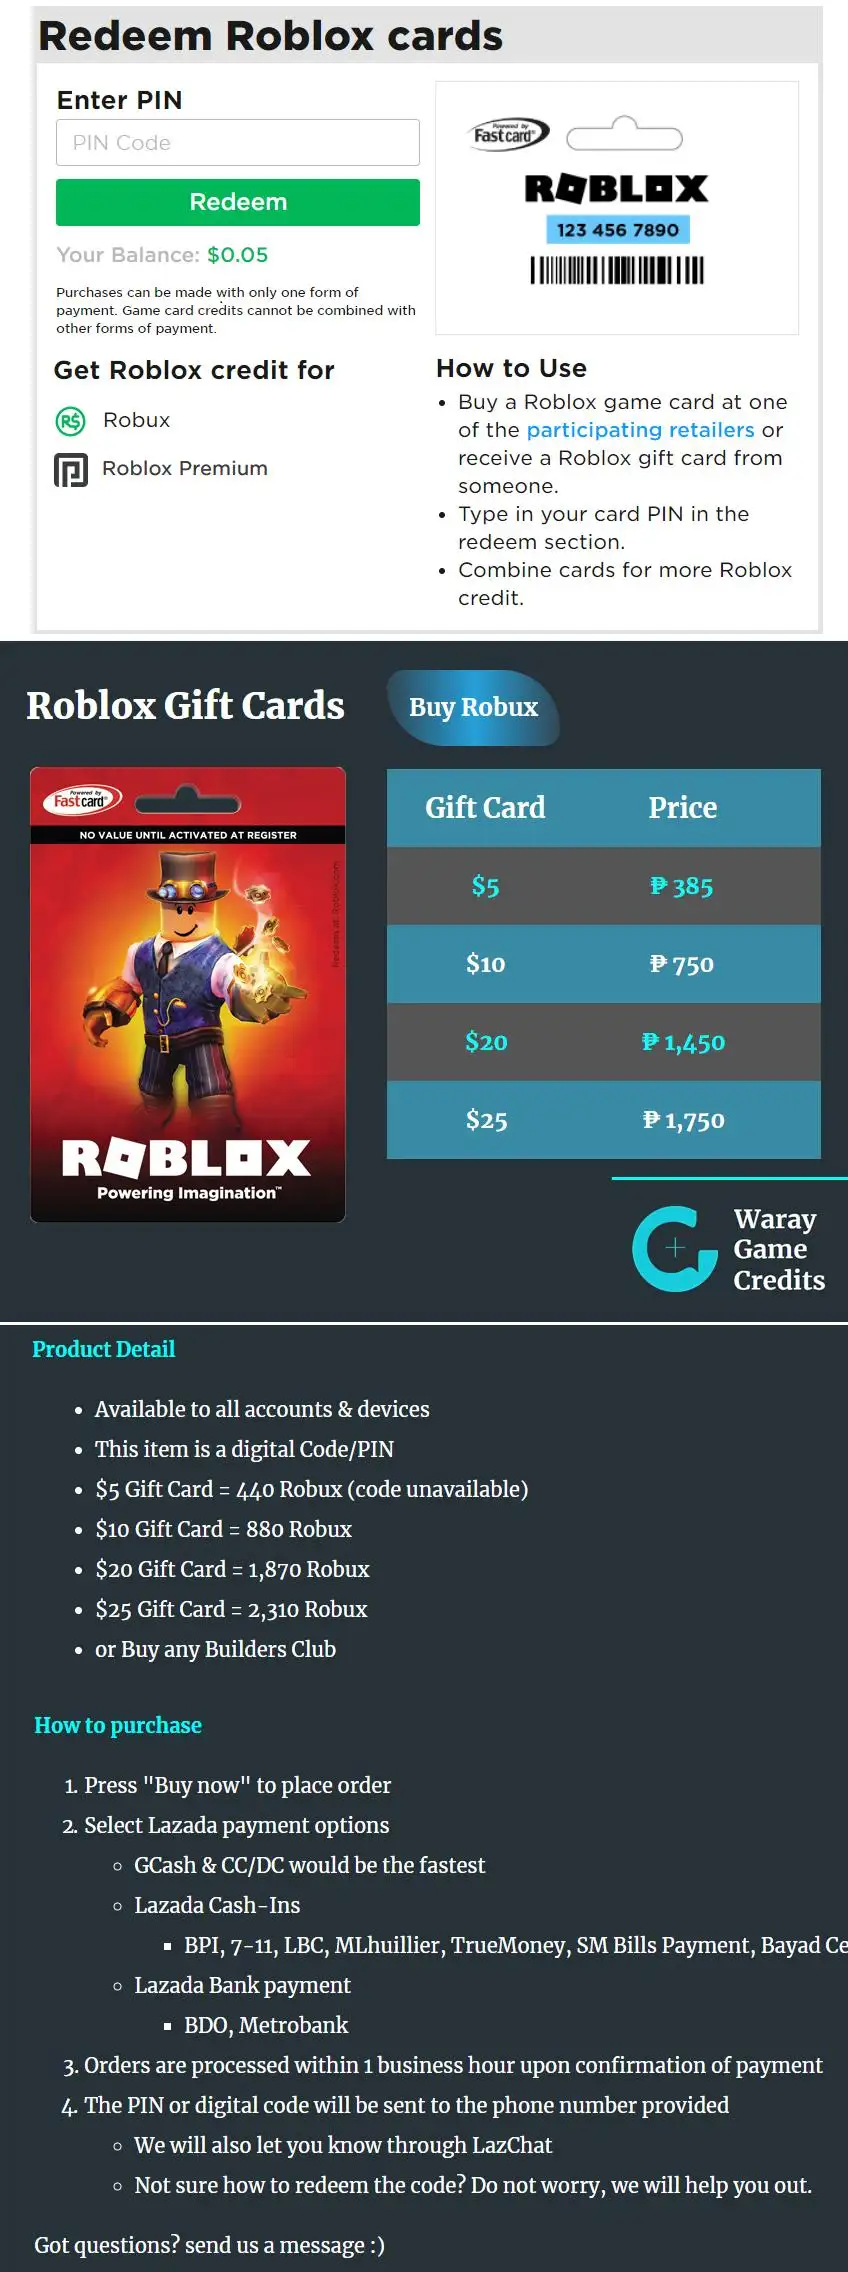 Robux Peso - how to buy robux using load in philippines